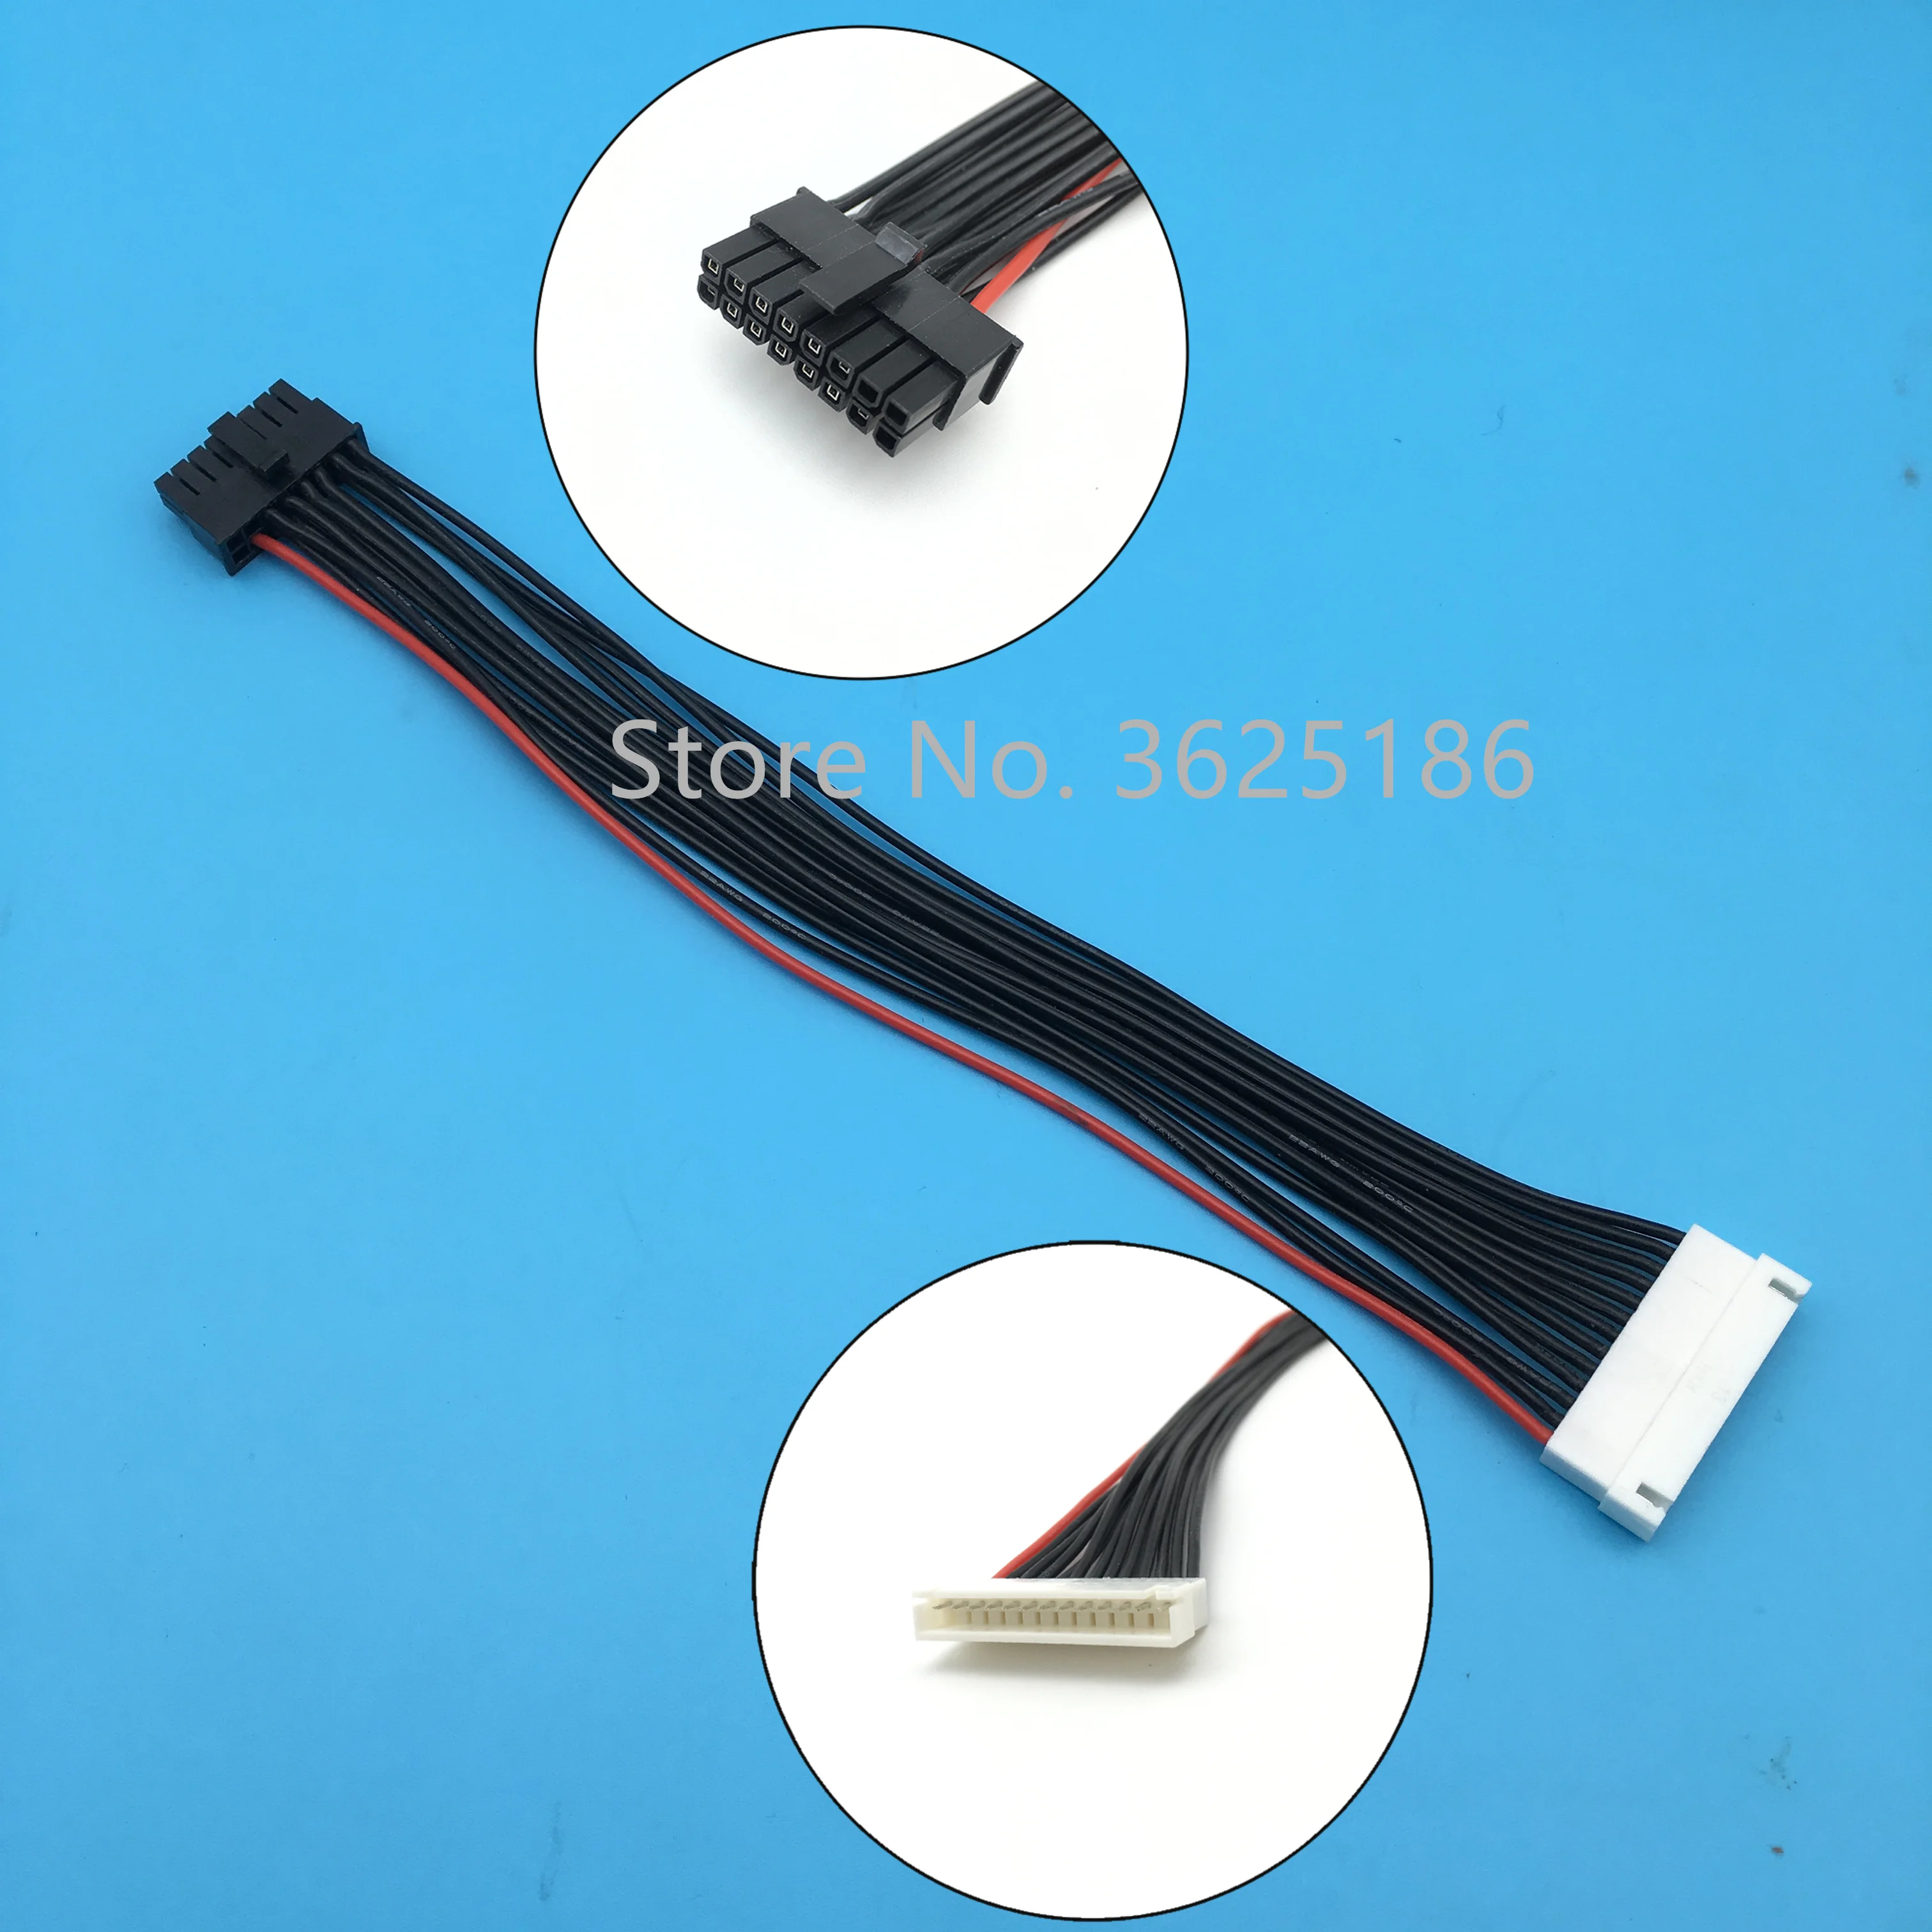 12S charger balance line /16p cable / single-layer to double-layer ...